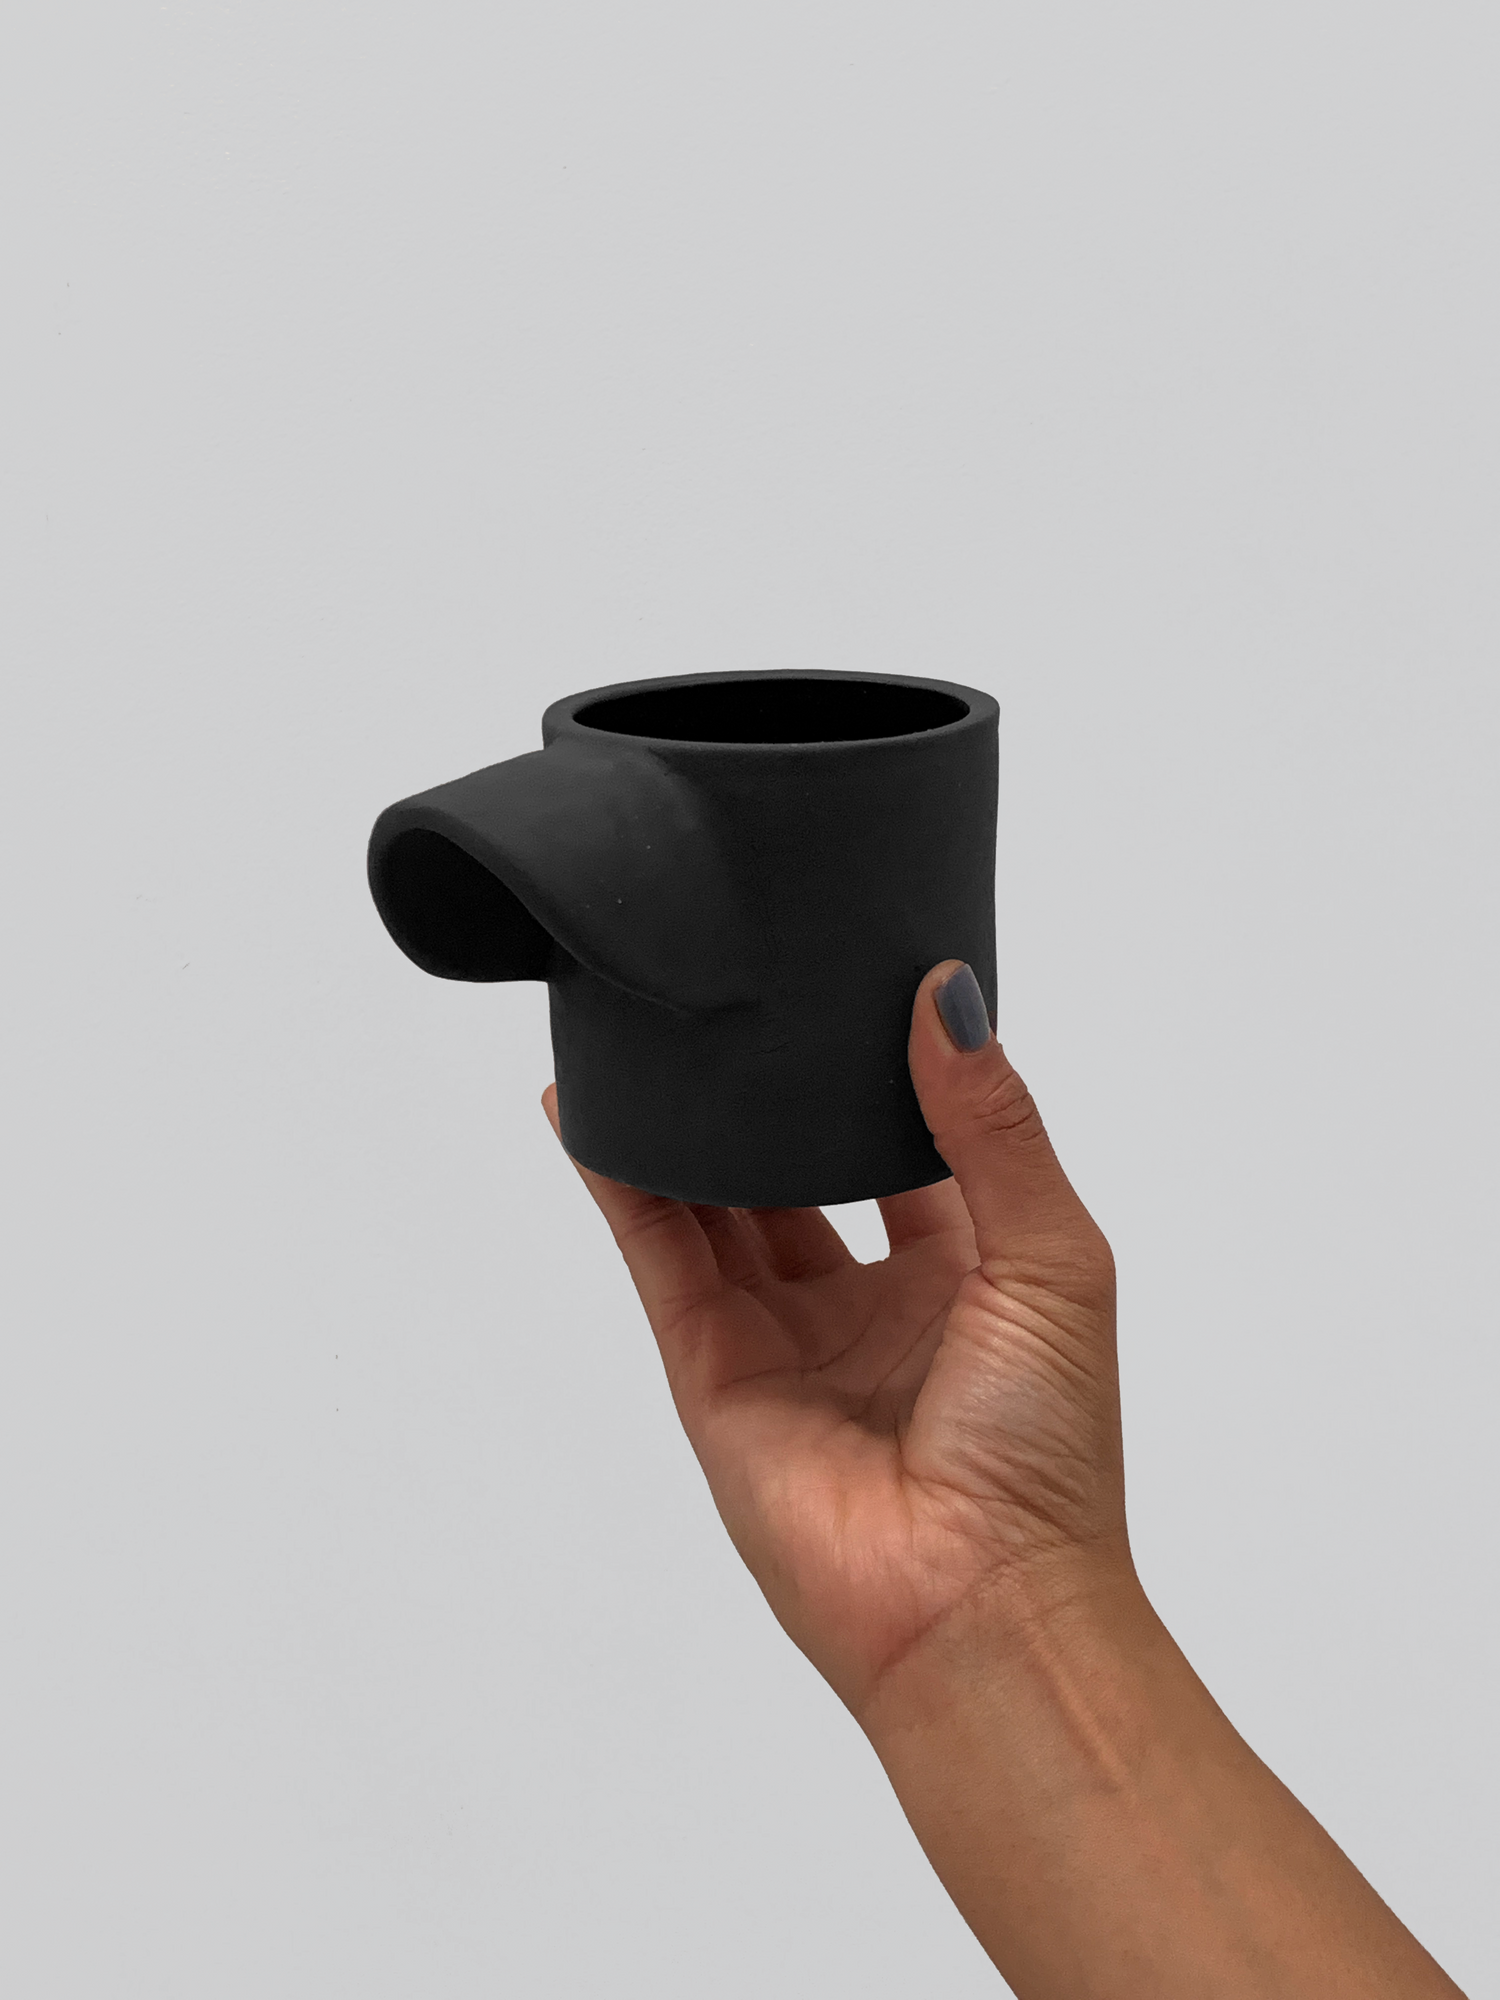 Black matte stoneware ceramic mug with an extended inward arching side handle.